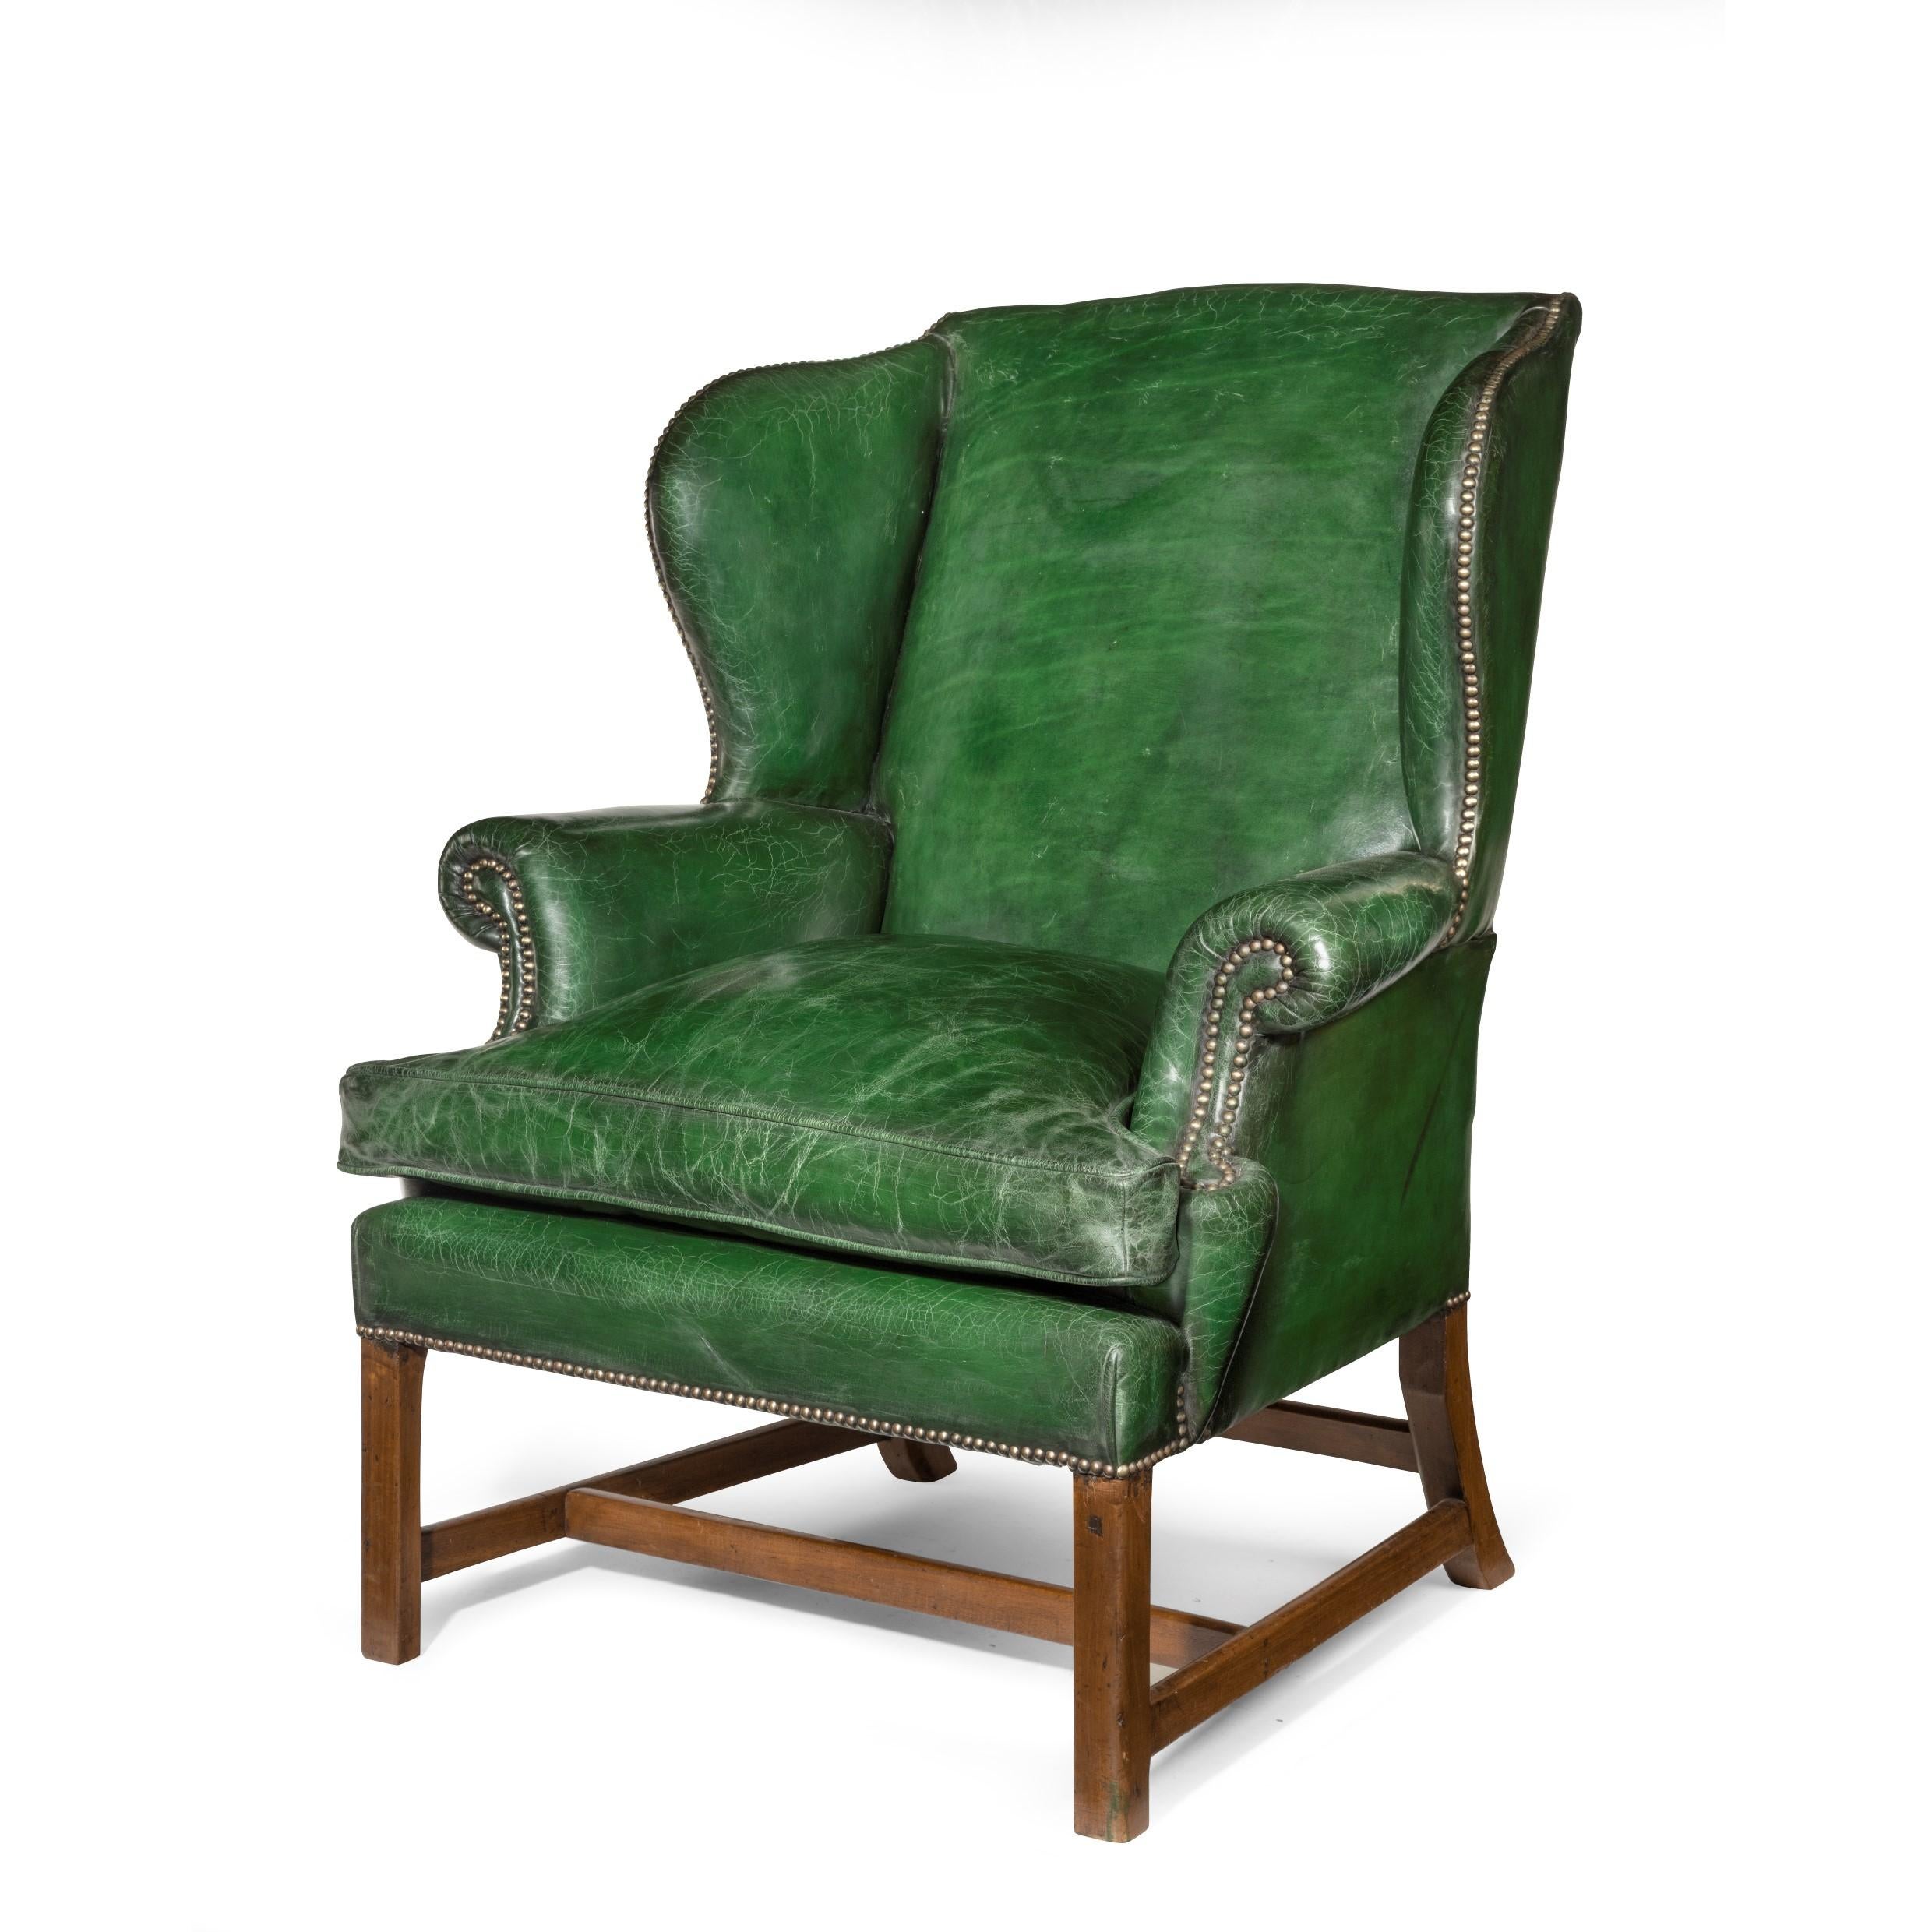 A generous George III mahogany wing armchair, of typical form with wings and scrolling arms, raised on square chamfered front legs and swept chamfered back legs, reupholstered in distressed green leather with brass studs, replaced castors. English,